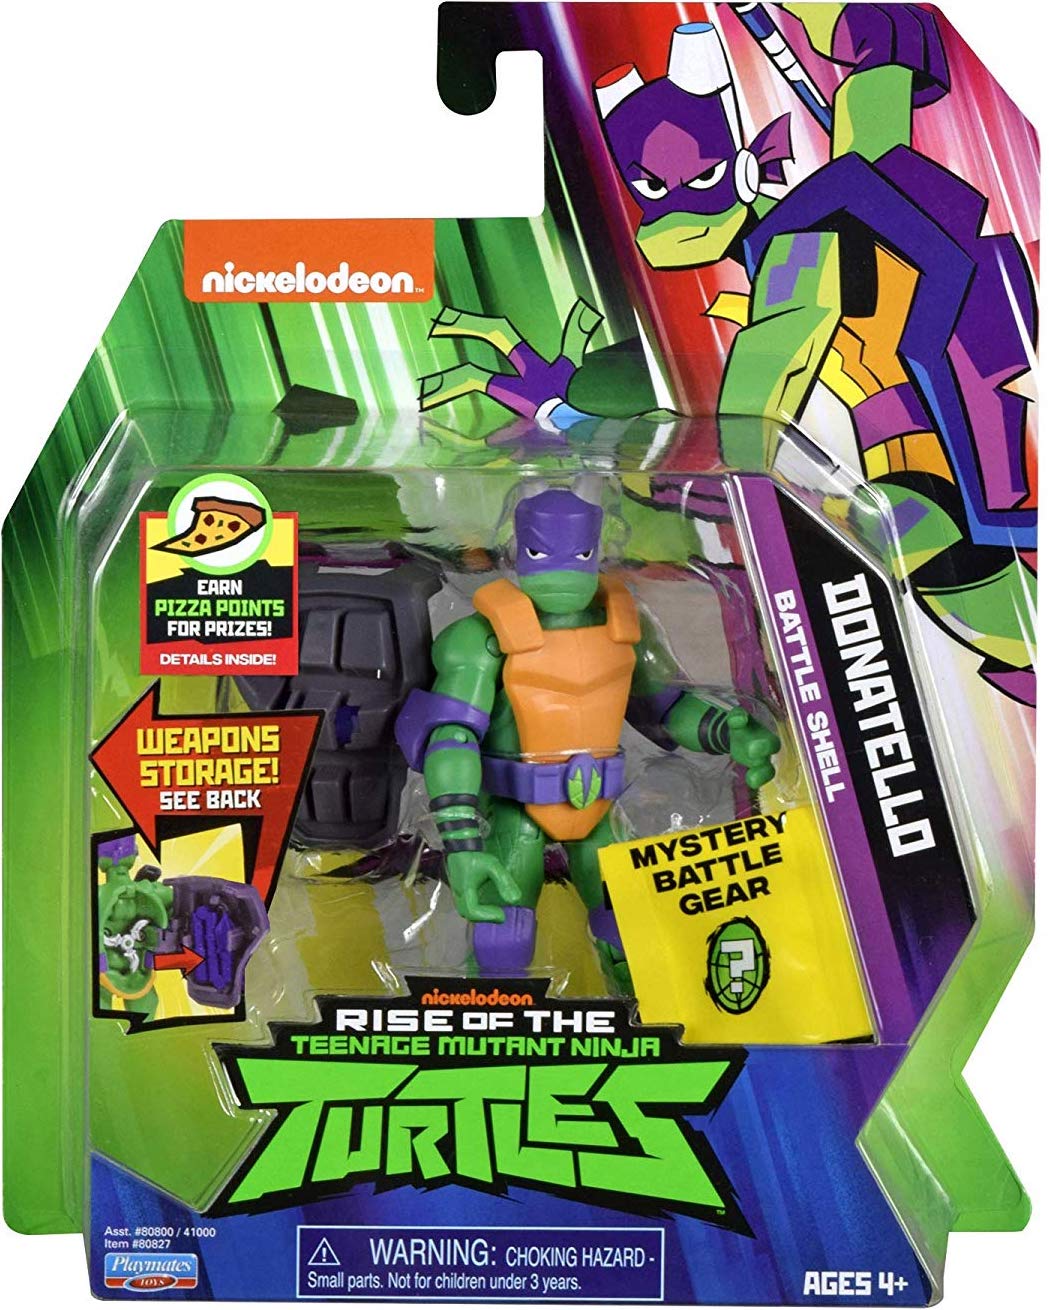 rise of the tmnt battle shell